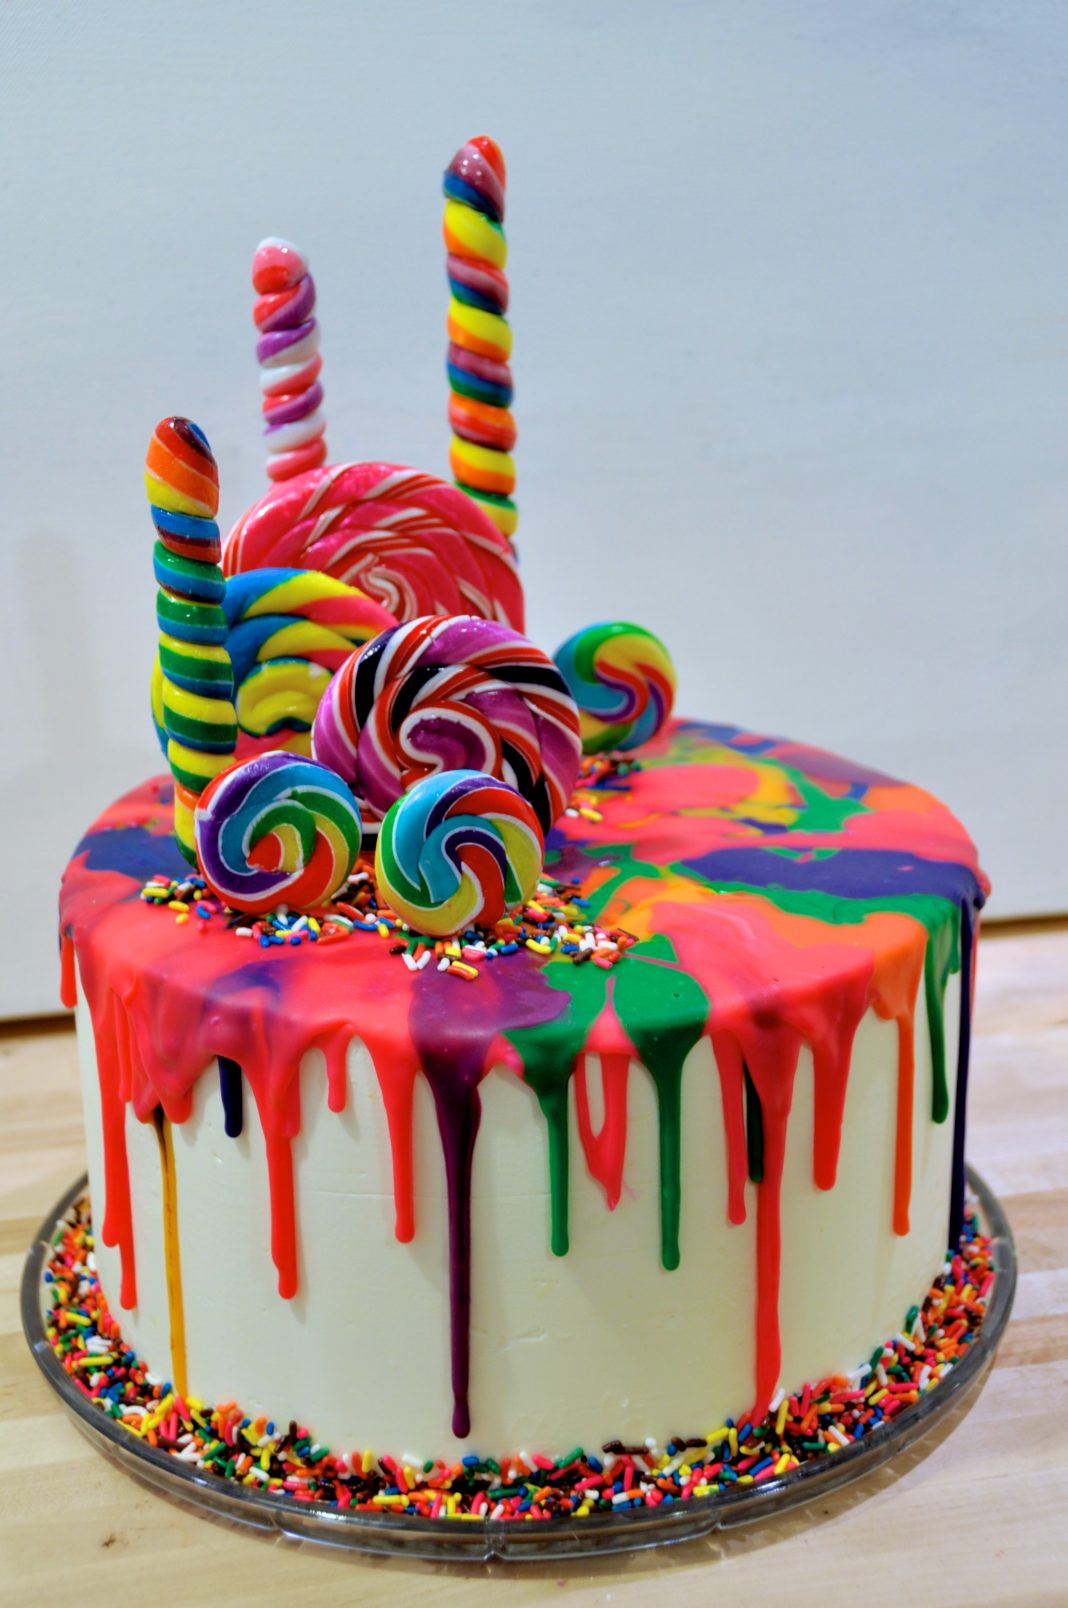 15 Rainbow Cake Ideas That Look Too Perfect To Eat